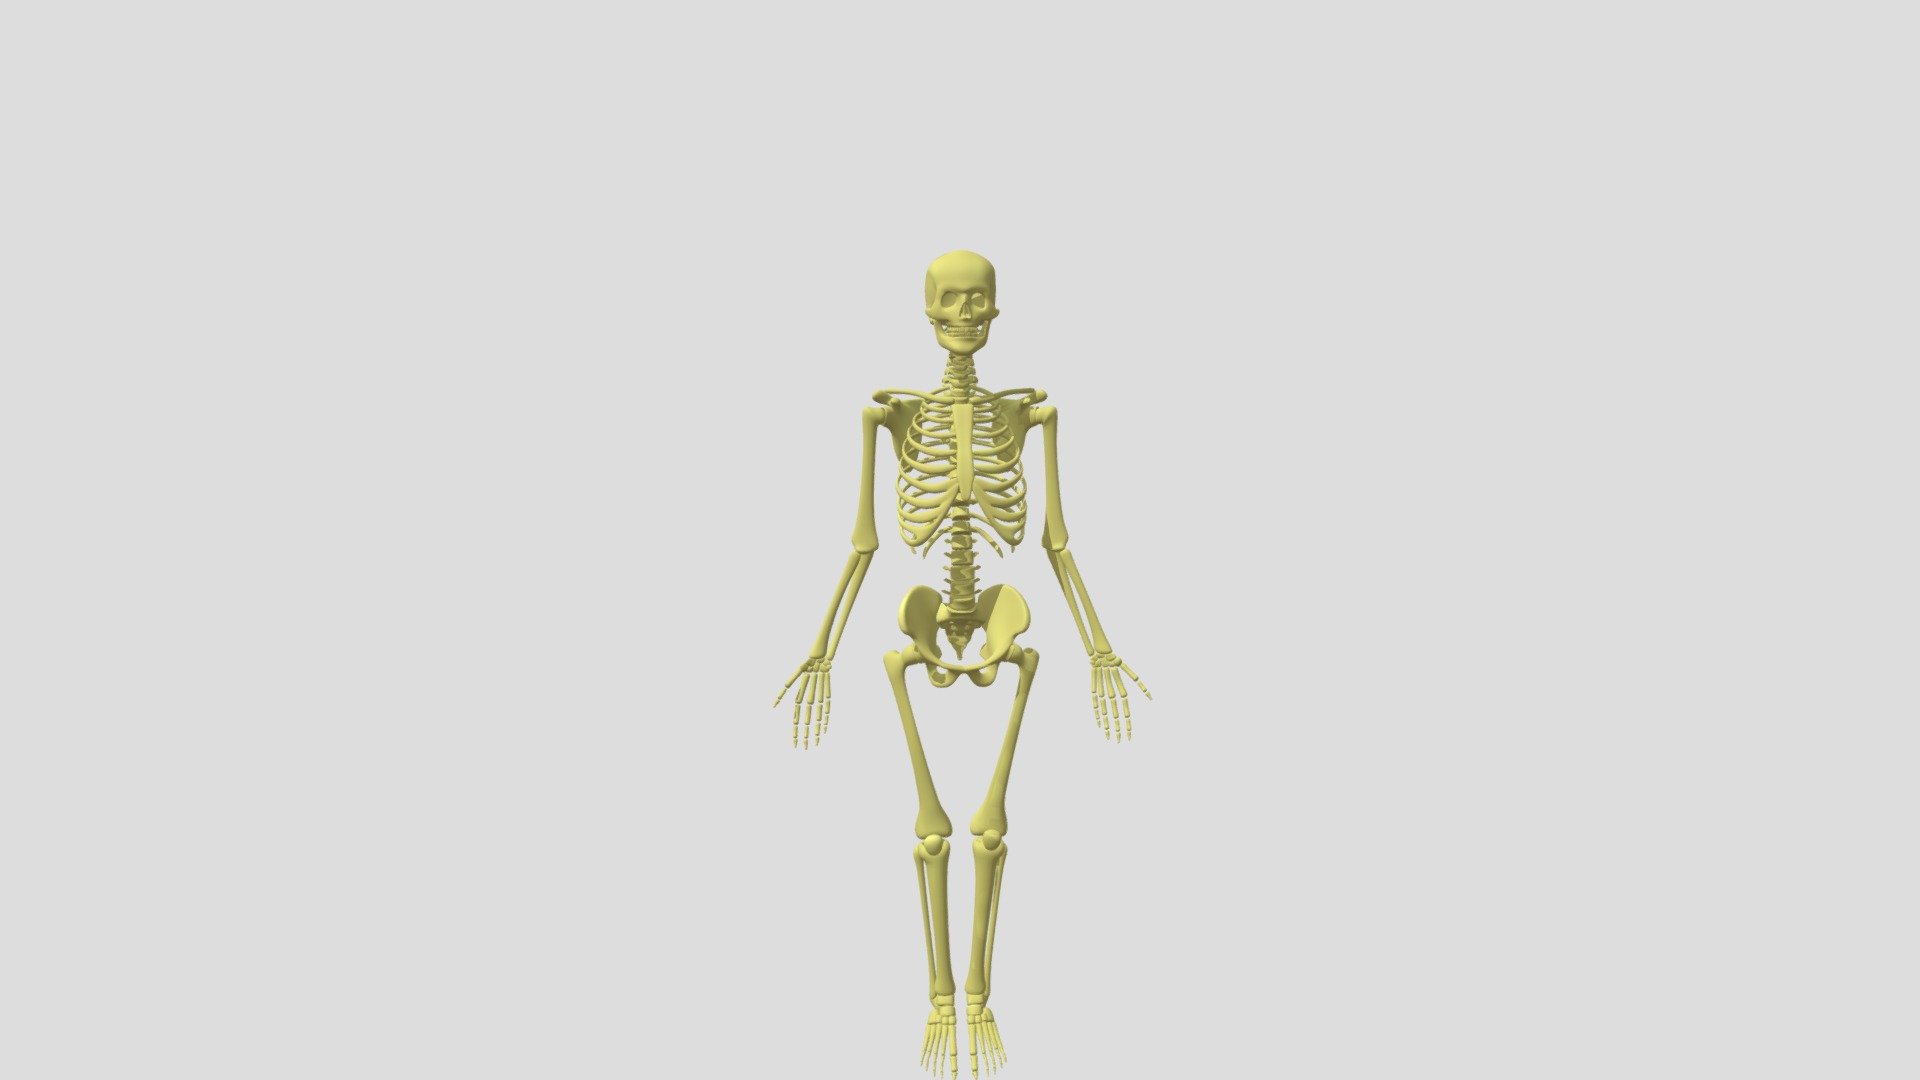 This model clearly exhibits an untextured mesh of a human anotimcal skeleton. This includes the spine, head, arms, legs and all other bones of the human body. Also in the file, is an armature rig that moves all body parts. 

The rig can be accessed by moving into &lsquo;pose mode' and roating or moving the desired armature bone. This will result in corrresponding movement with the bone, allowing it o be very useful for animation.

The bone is quite low-poly, posessing a minimum face and vertex count. 
Soon, a textured rendition of this mode will be made abvailable for sale, selling along with an unrigged skeleton head mesh.

More following will corresponsingly lead to more models, so if this one is enjoyed, and &lsquo;liked', there will be more free ones to come. 

Please comment any questions or queries 3d model